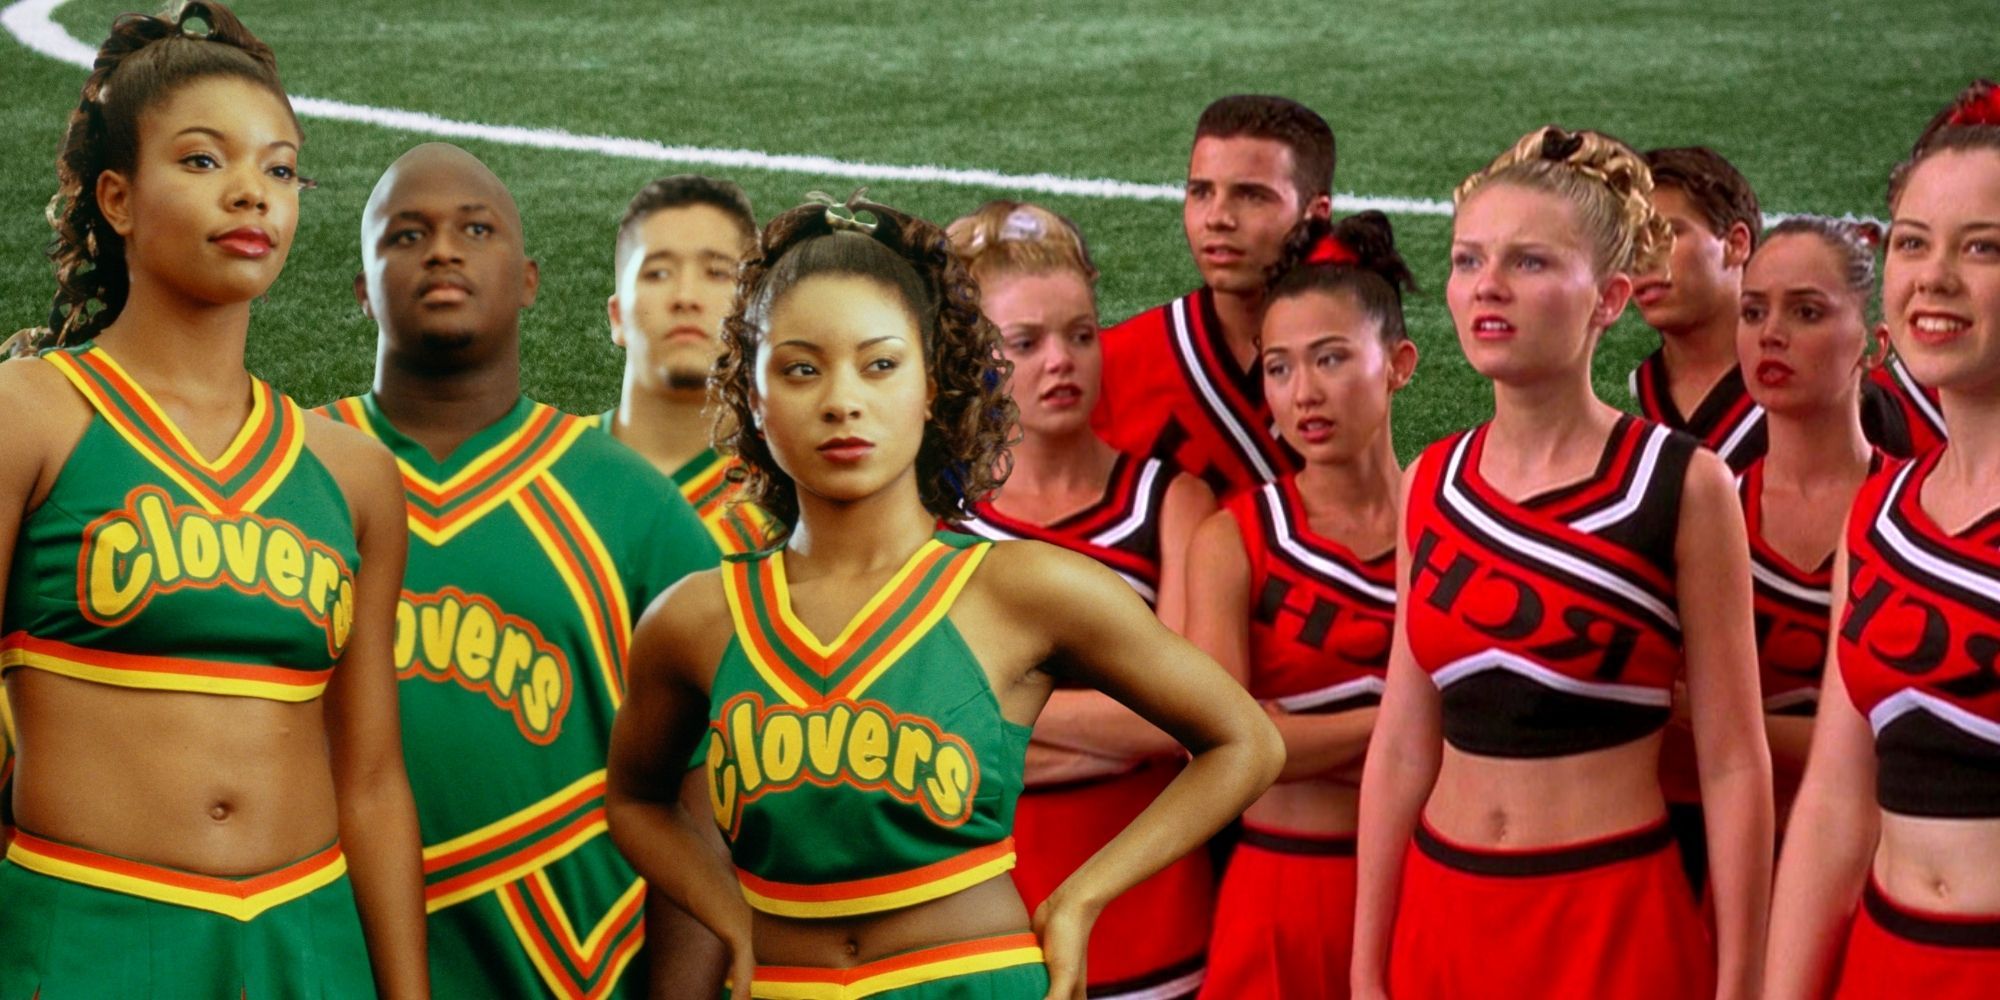 Bring it On Kristen Dunst and Gabrielle Union Toros vs Clovers squads staring each other down